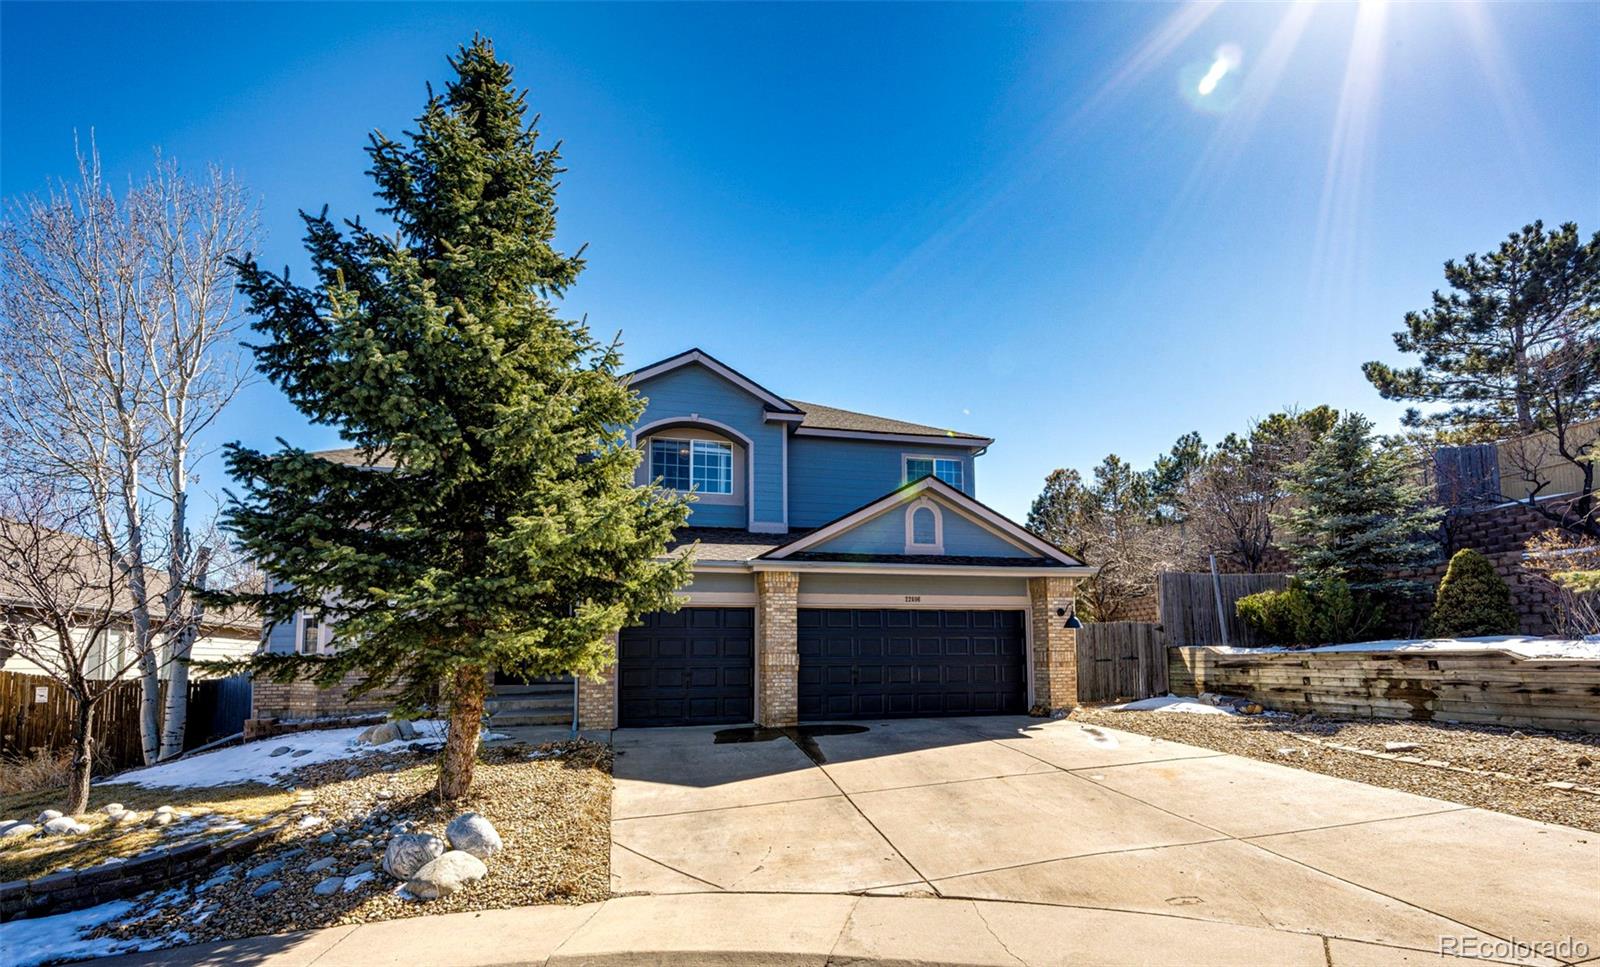 22406 E Maplewood Place, aurora MLS: 5191402 Beds: 4 Baths: 3 Price: $700,000